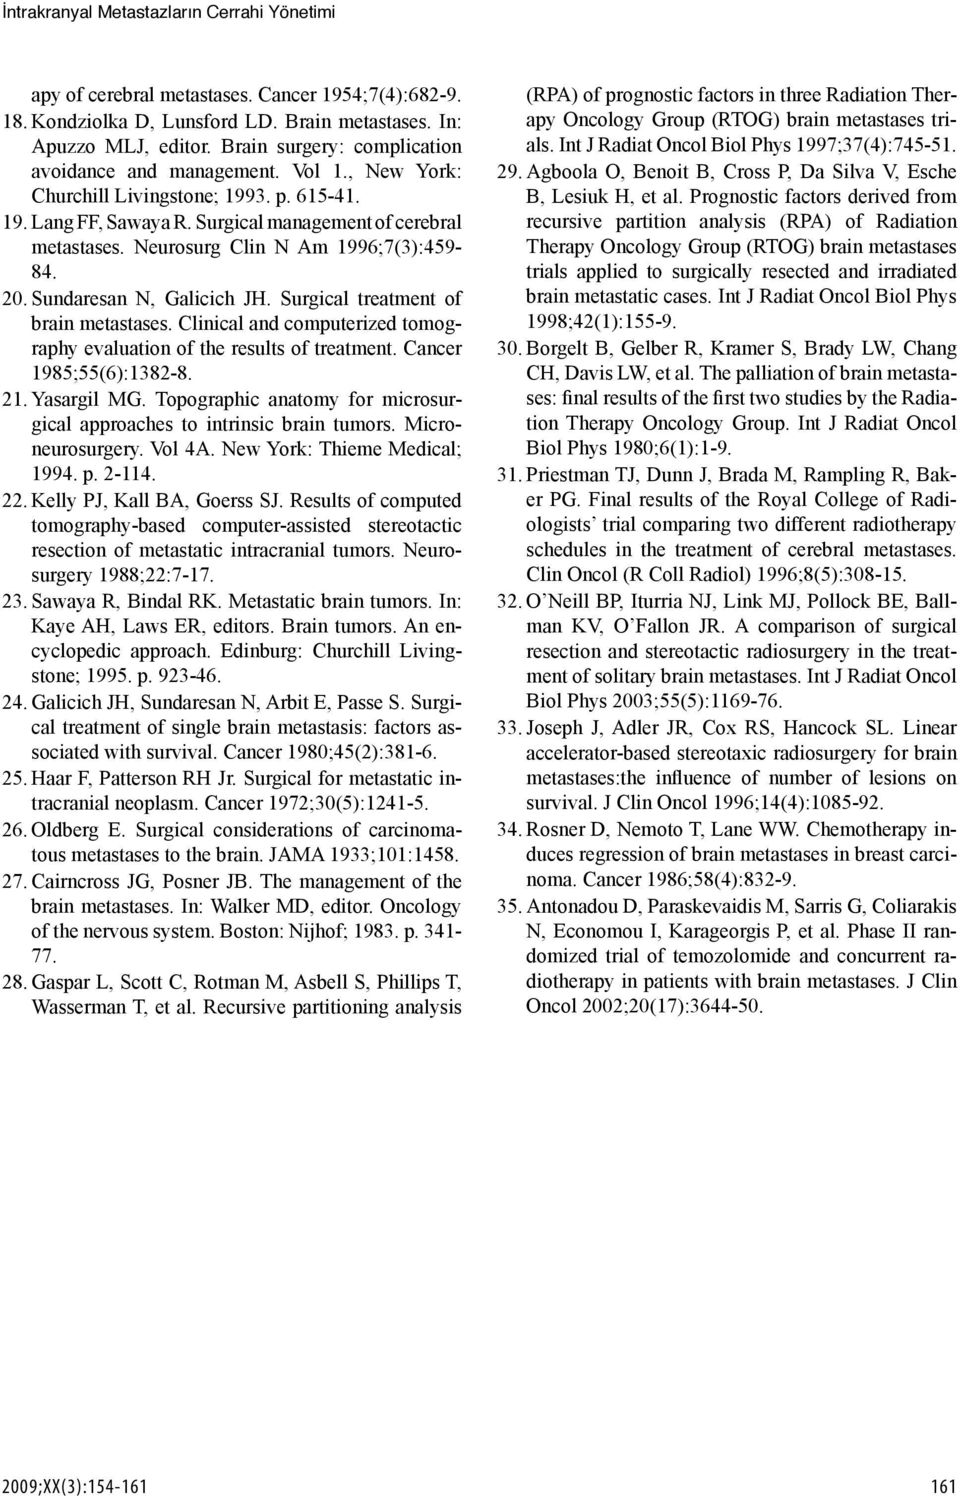 Neurosurg Clin N Am 1996;7(3):459-84. 20. Sundaresan N, Galicich JH. Surgical treatment of brain metastases. Clinical and computerized tomography evaluation of the results of treatment.